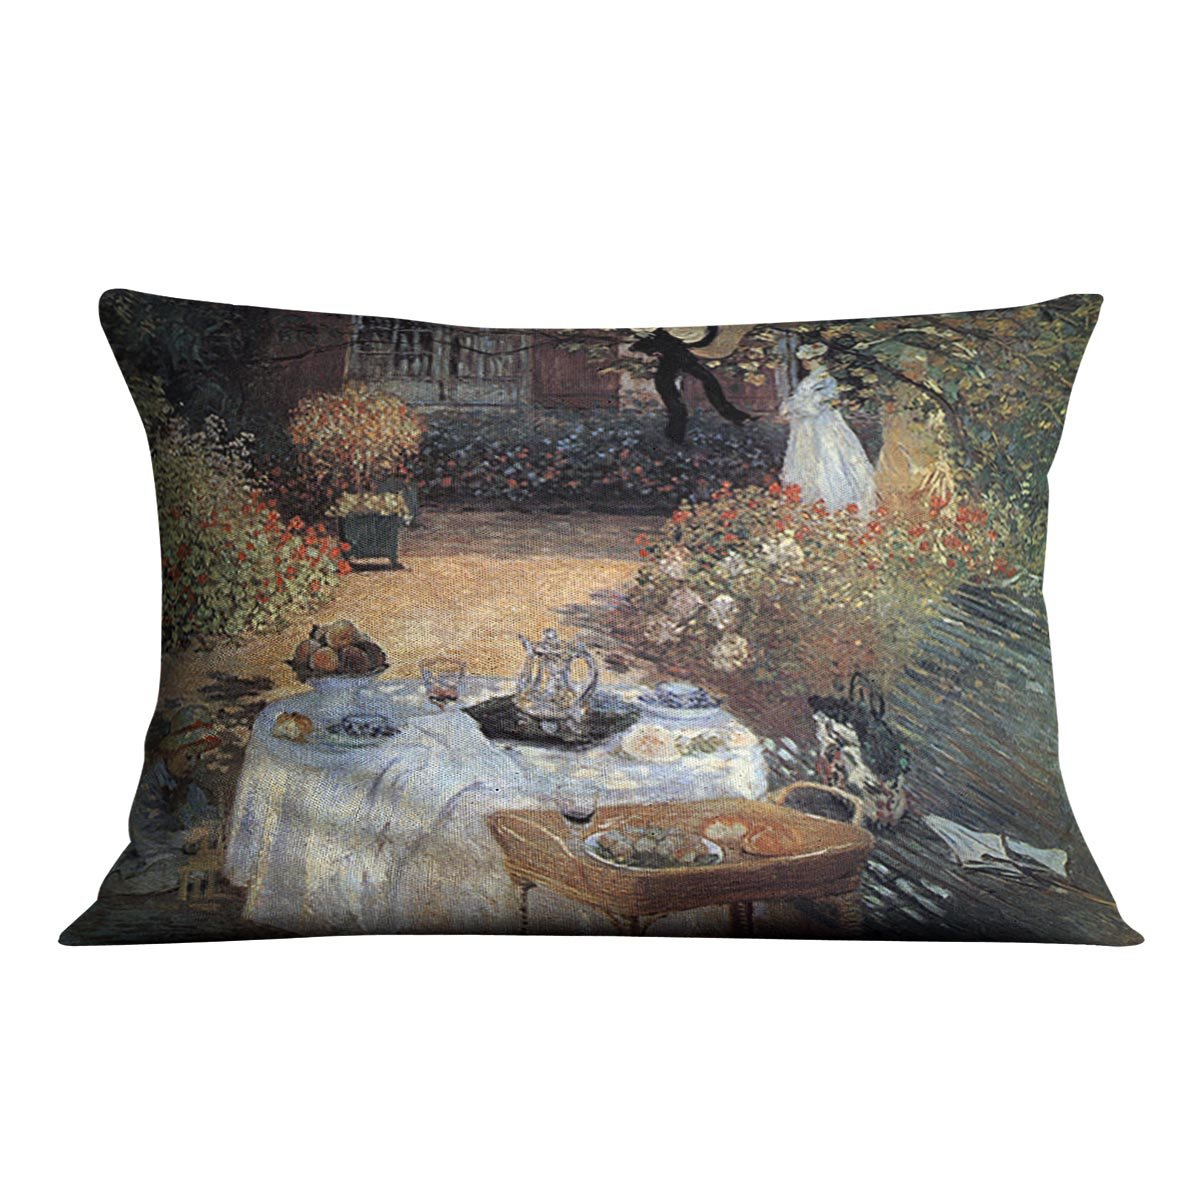 The lunch 2 by Monet Throw Pillow